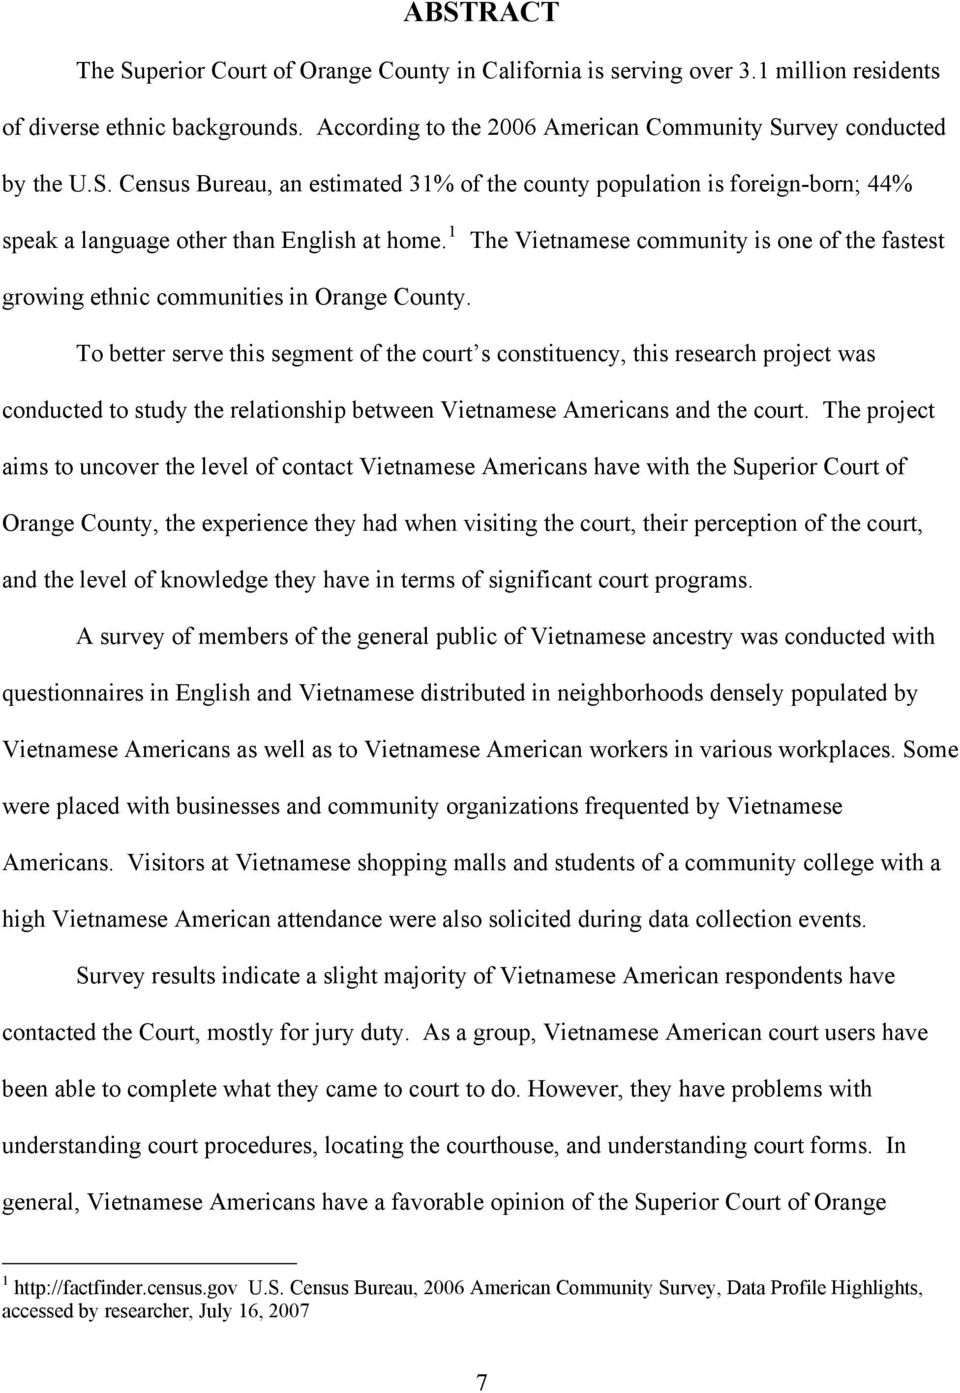 To better serve this segment of the court s constituency, this research project was conducted to study the relationship between Vietnamese Americans and the court.